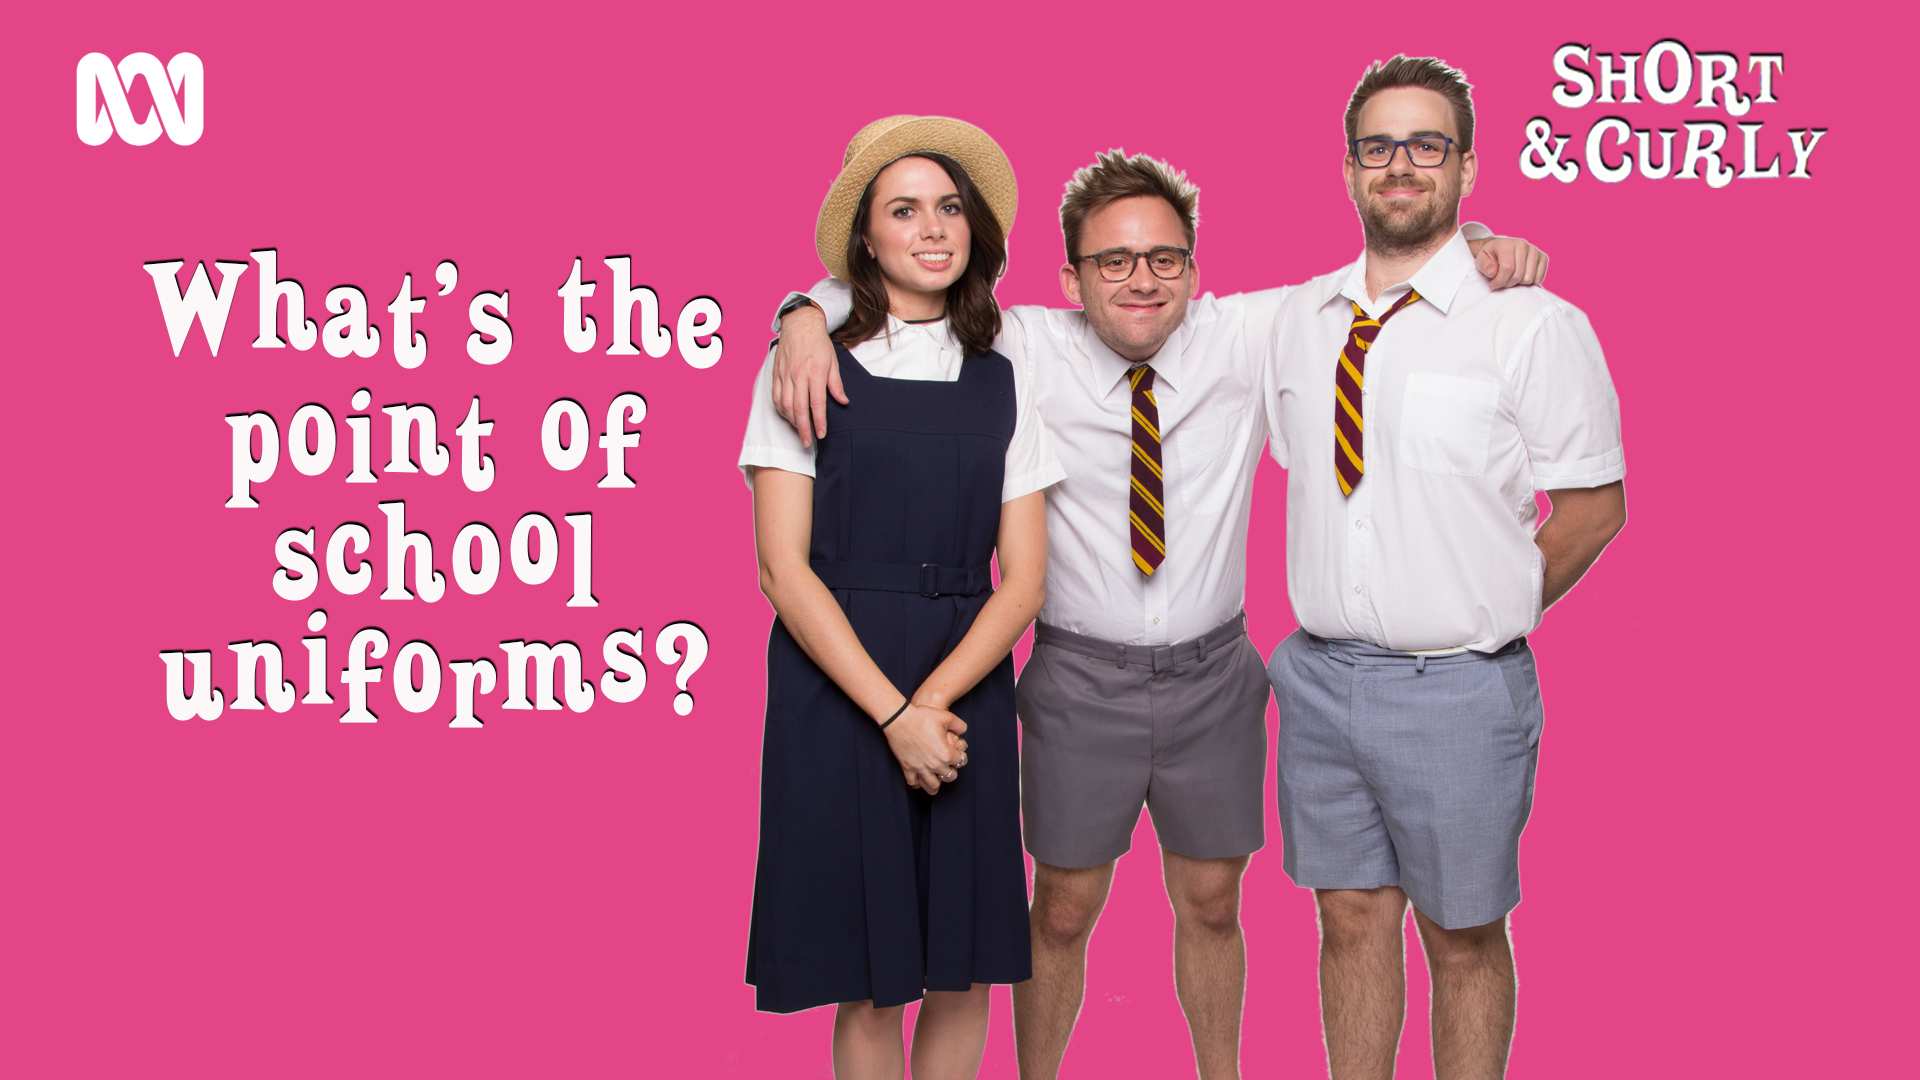 What’s the point of school uniforms?